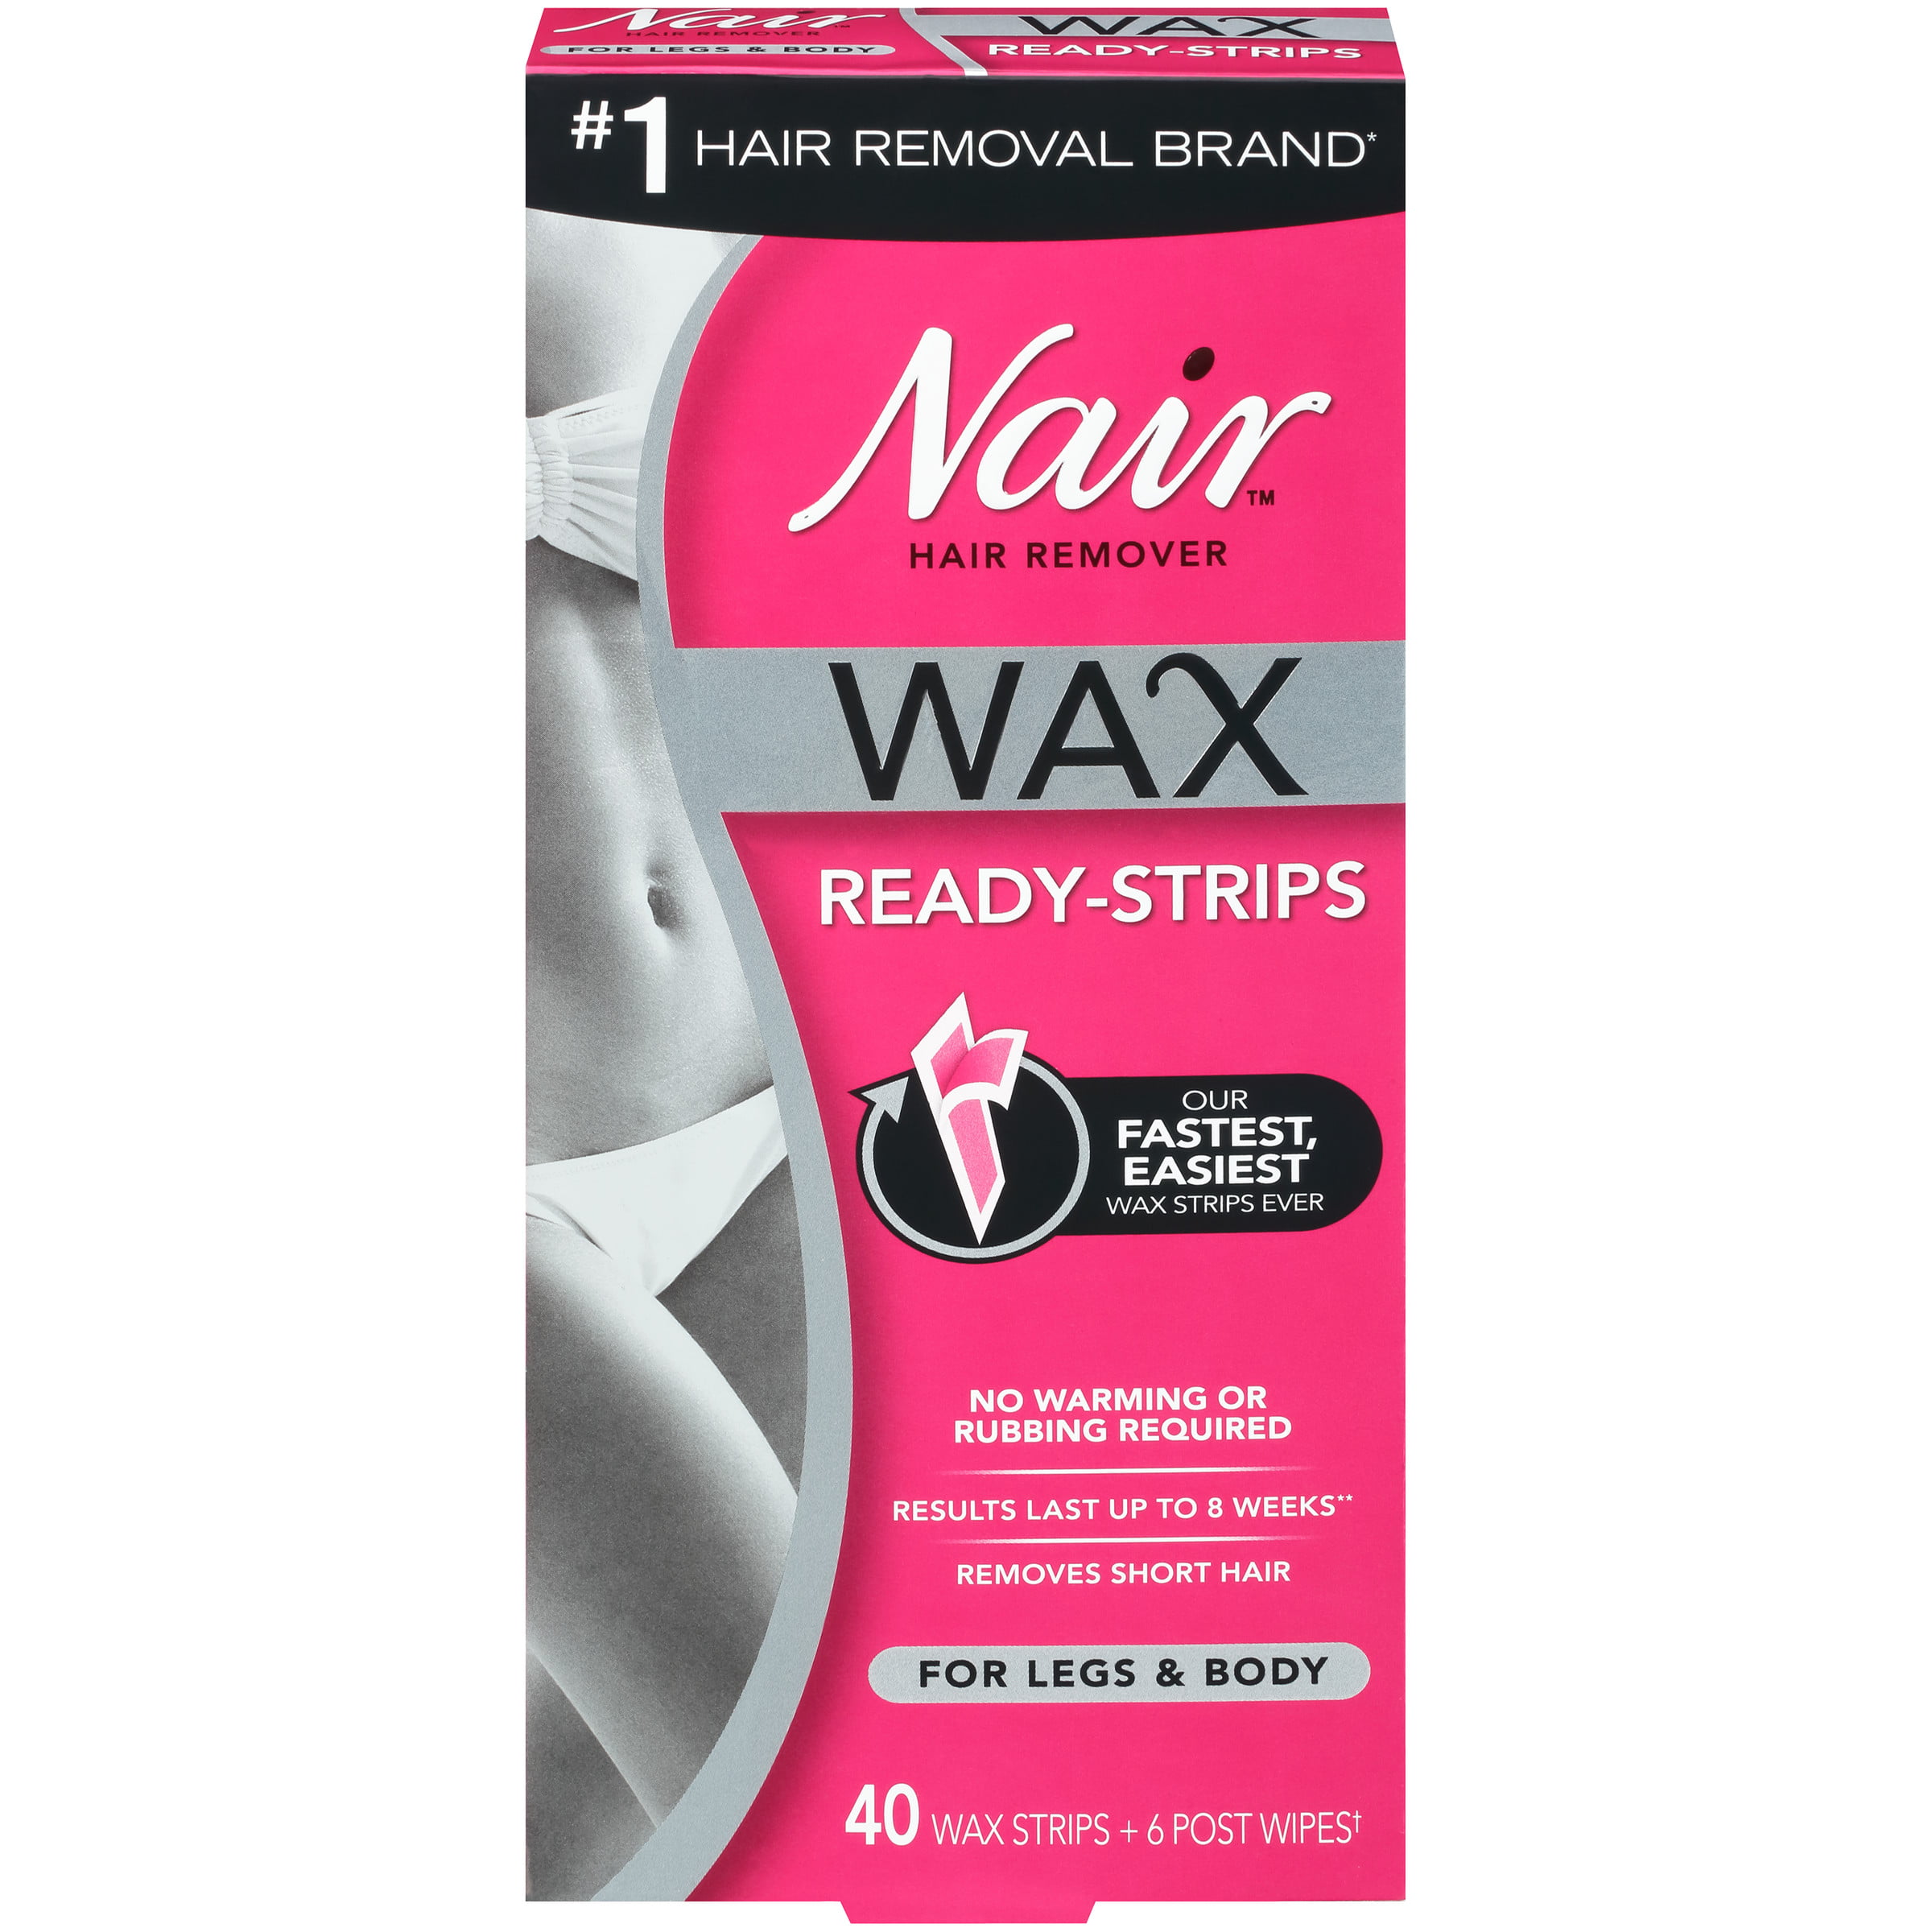 Nair Hair Remover Wax Ready- Strips for